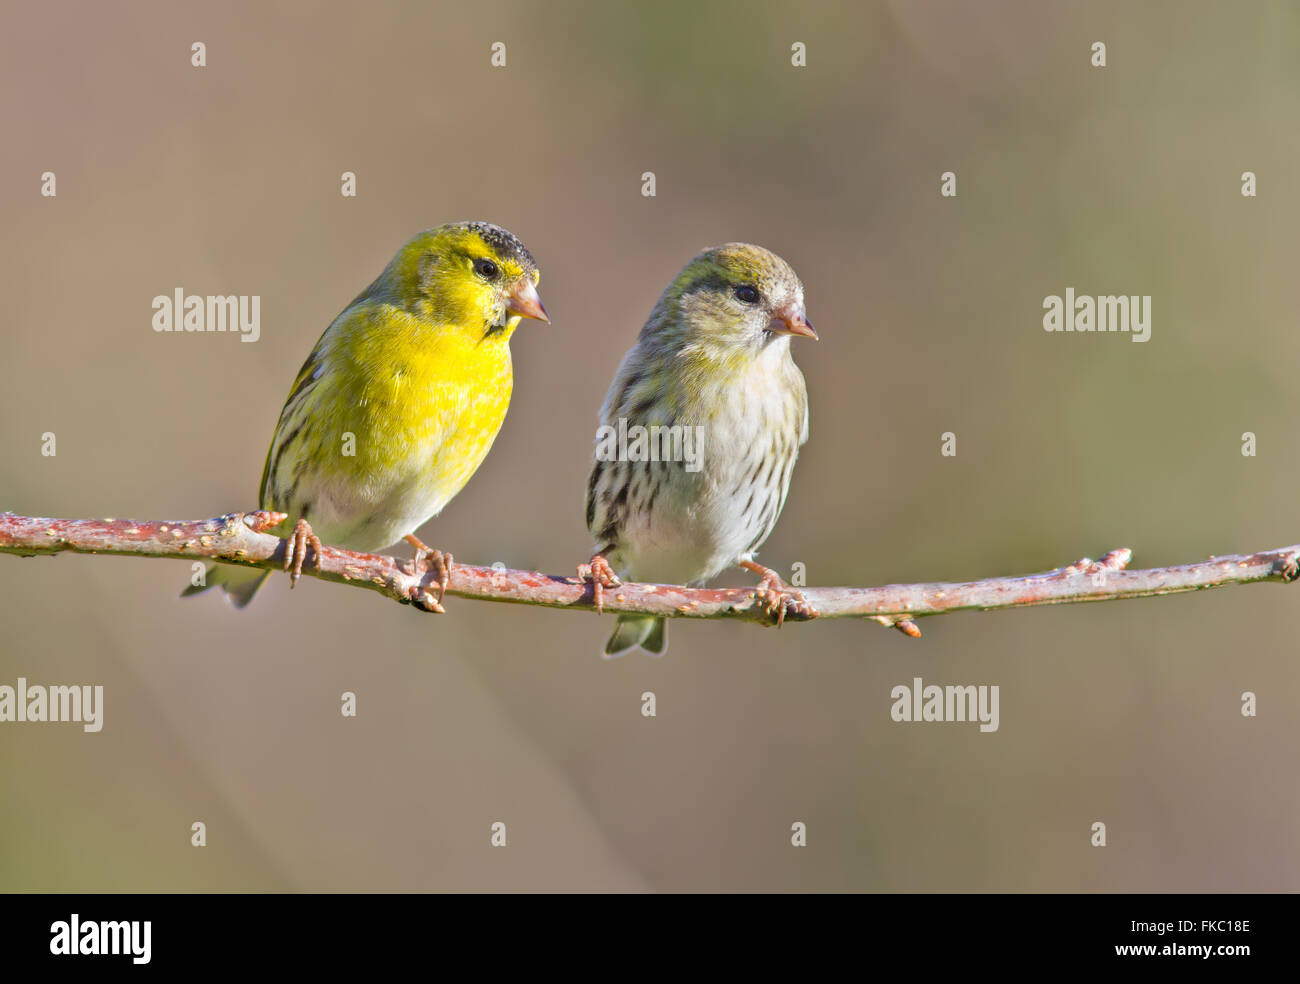 A male and female Siskin perched on a tree branch Stock Photo